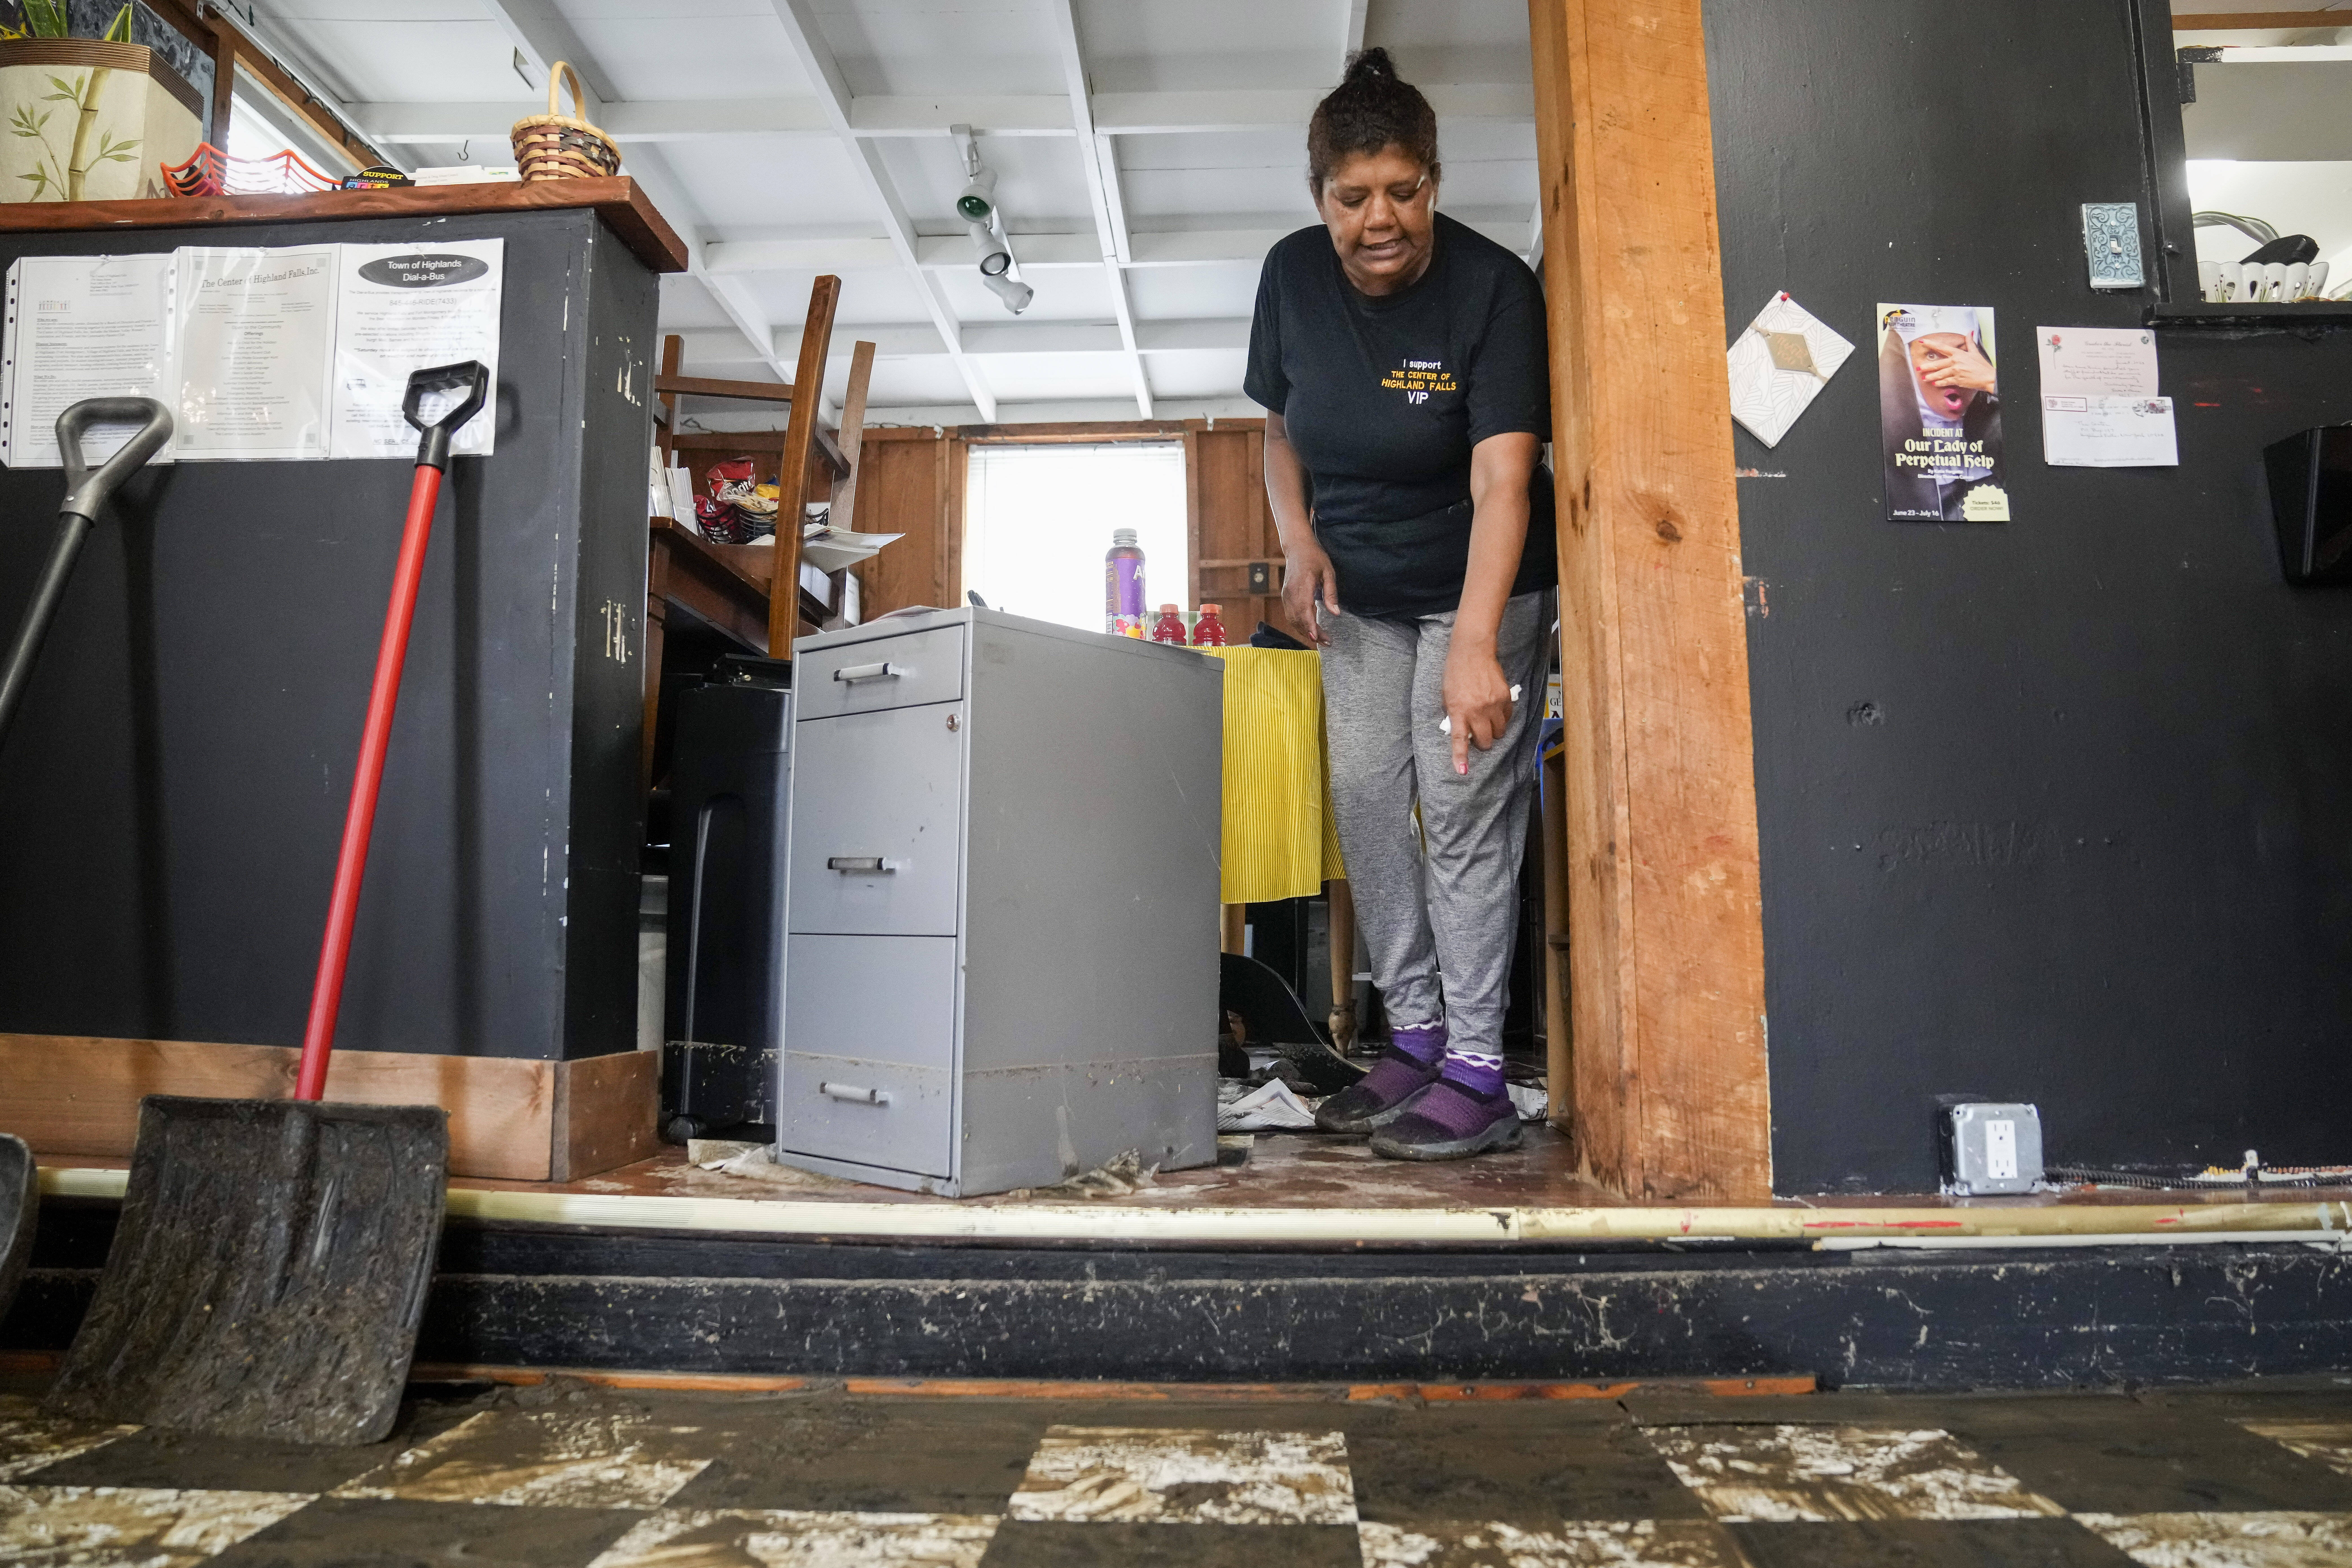 Kathy Eason, a worker at the Center for Highland Falls, points to the waterline where she had been trapped by floodwaters the previous day inside the organizations storefront, July 10, 2023, in Highland Falls, N.Y. (John Minchillo/AP)